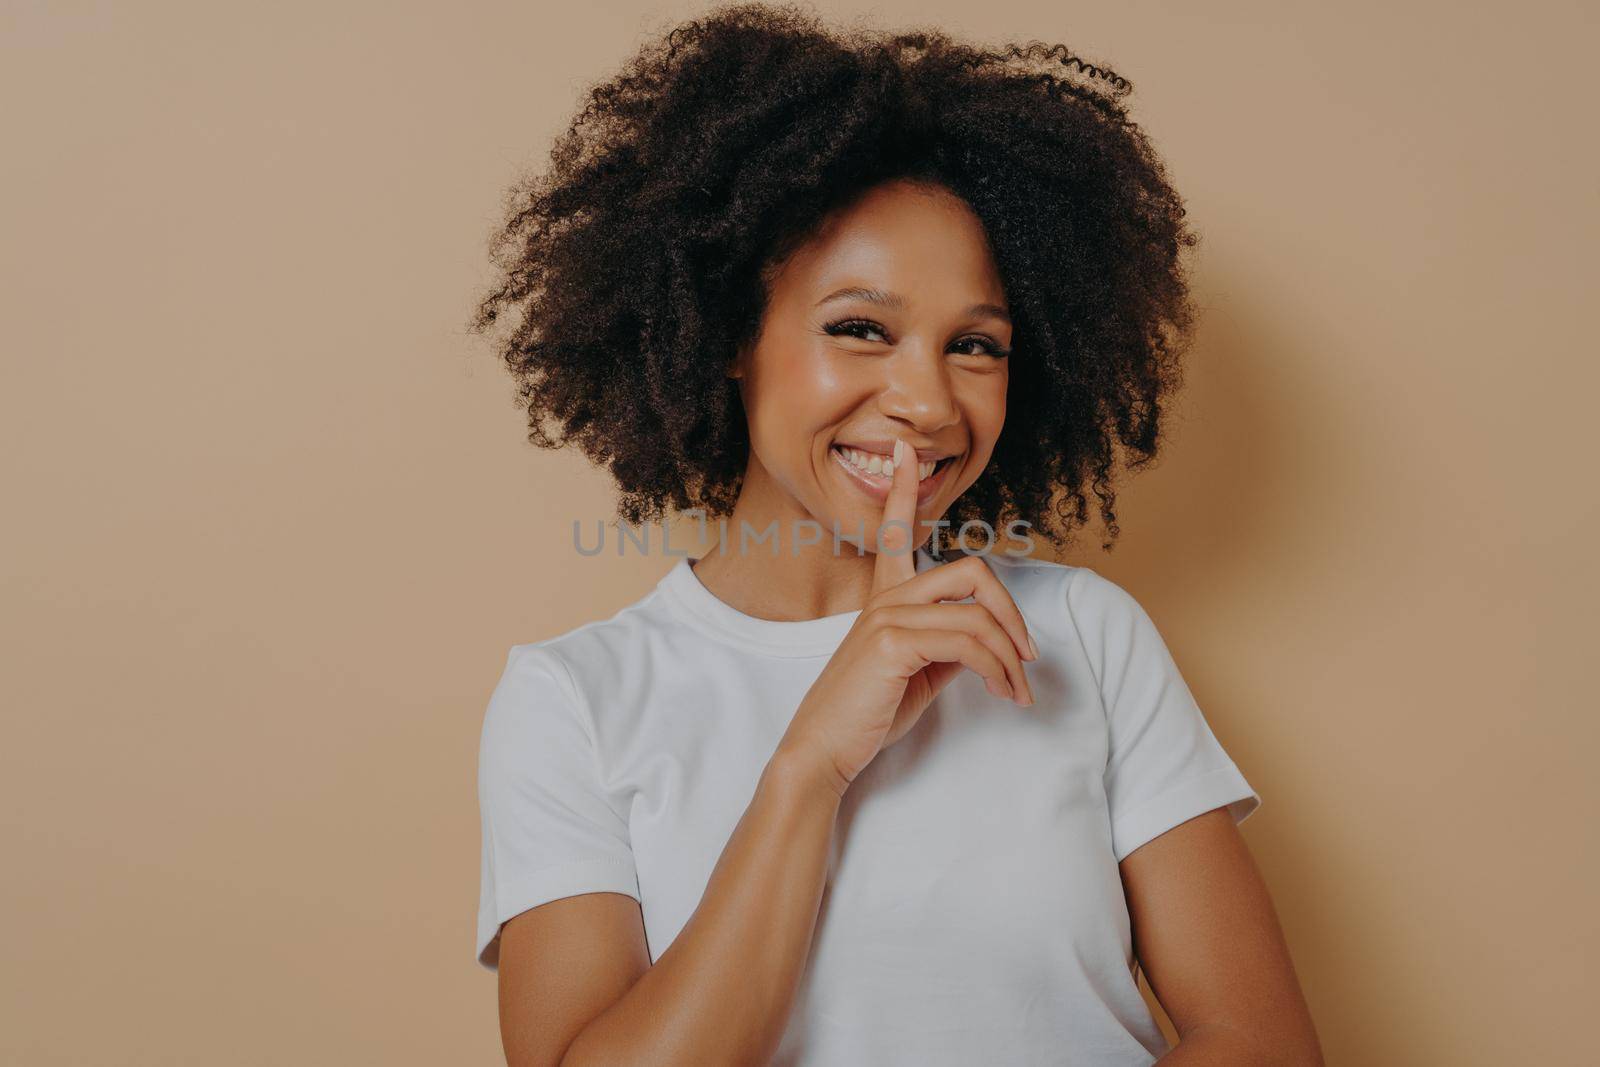 Cheerful smiling afro girl showing shhh sign, keep silence gesture, with index finger near lips, standing over pastel beige background and looking at camera. Positive emotions and body language